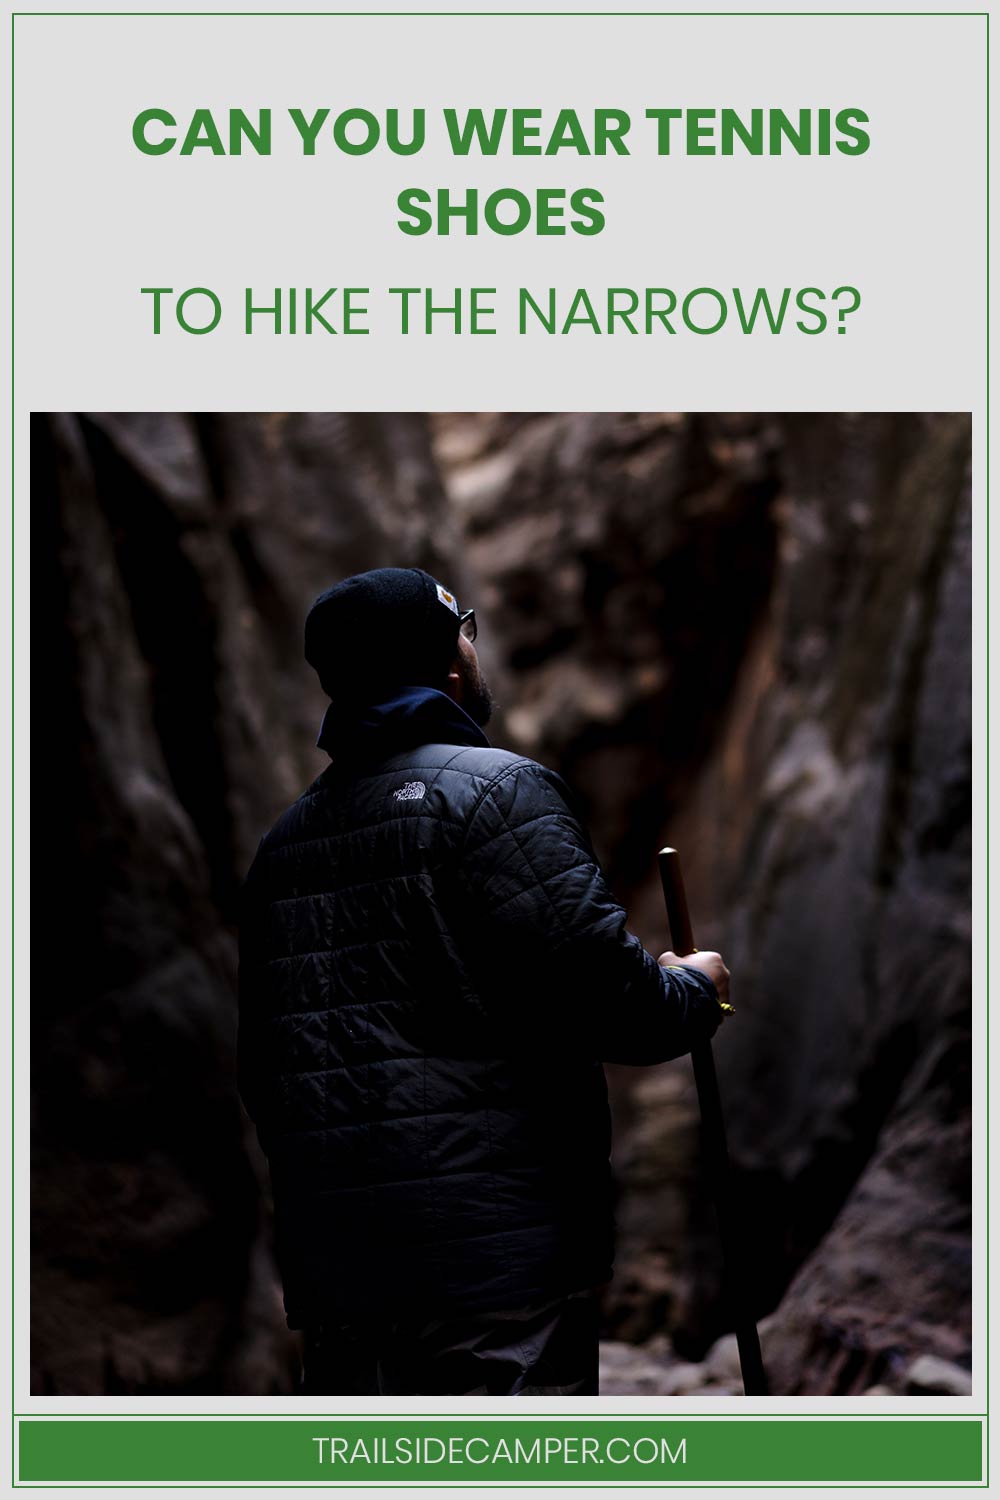 Can You Wear Tennis Shoes To Hike The Narrows?